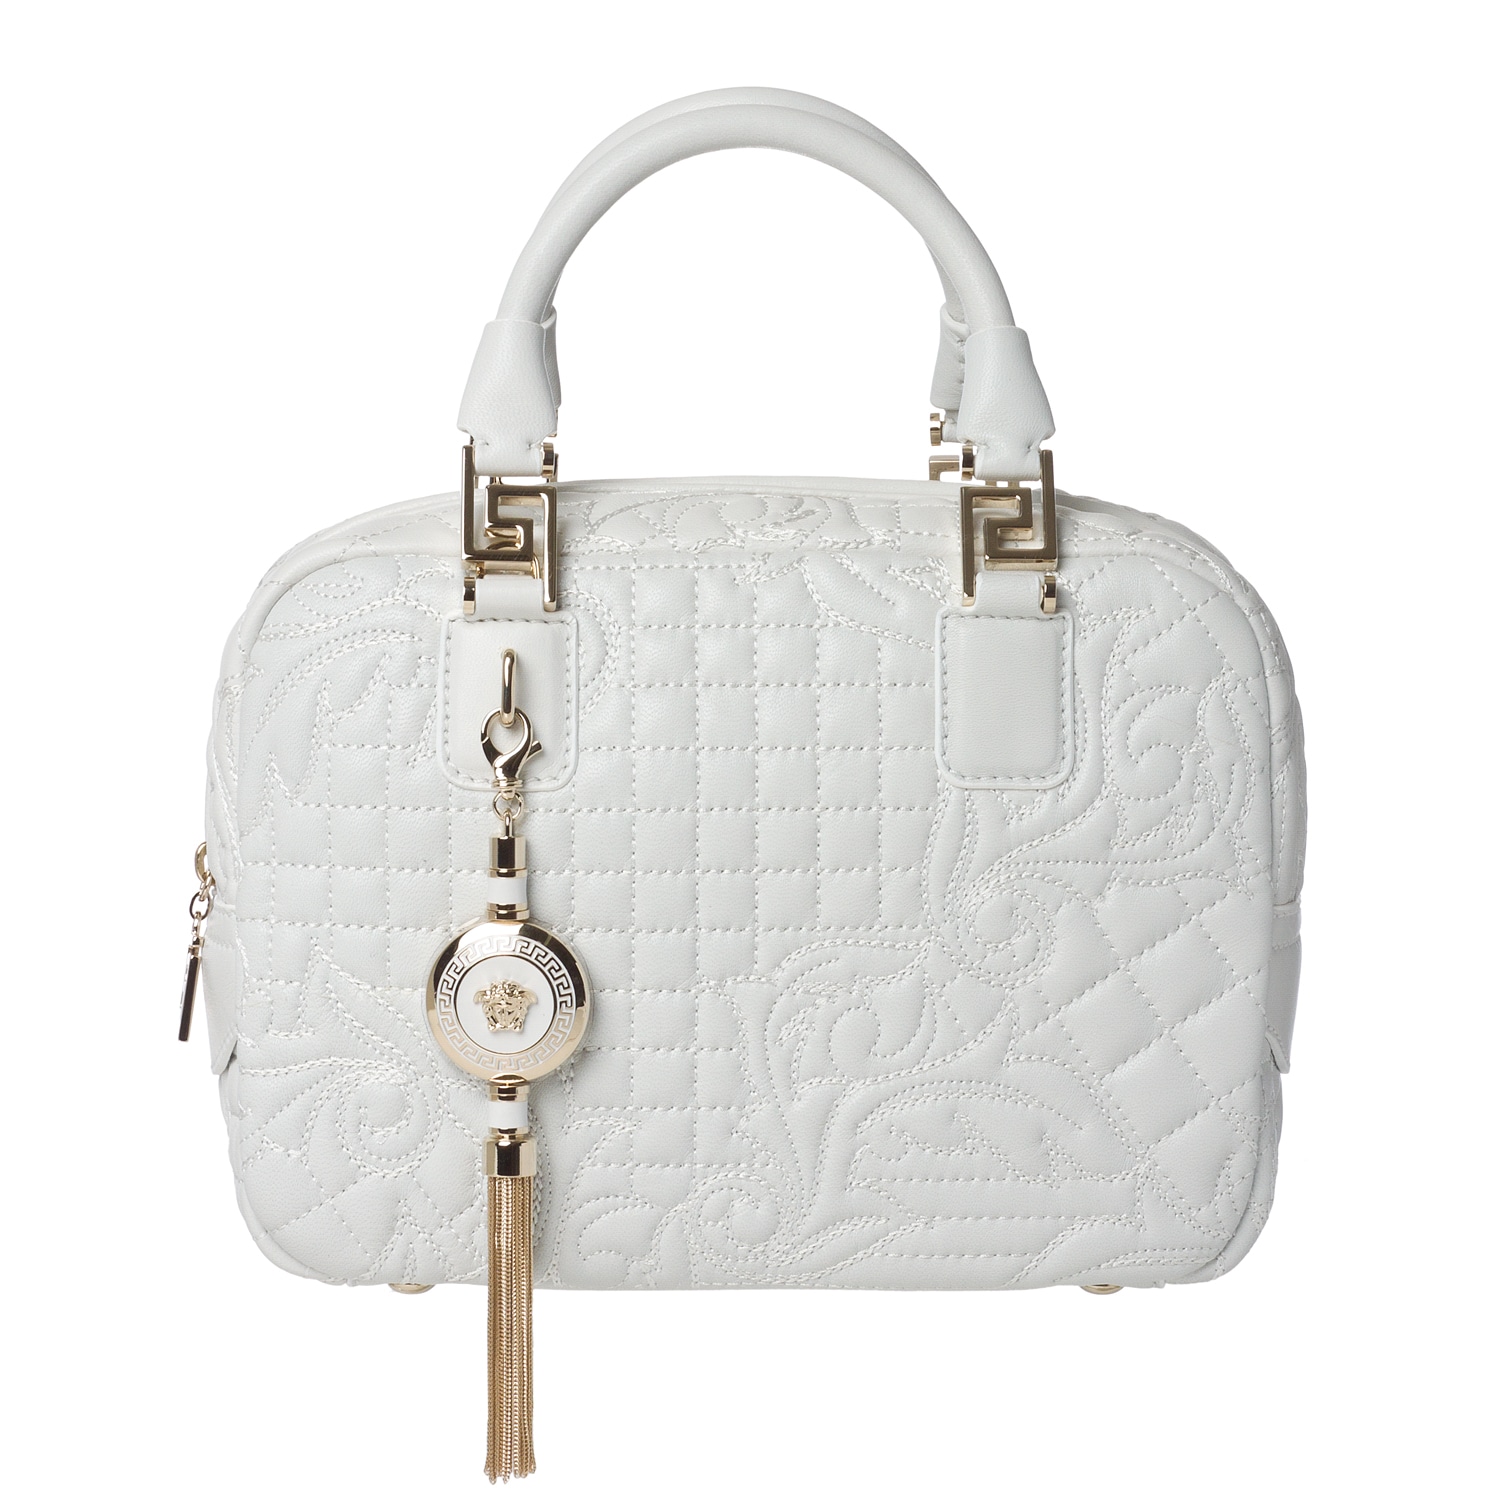 Versace 'Vantias' Quilted White Leather Satchel Bag Free Shipping Today 14357426